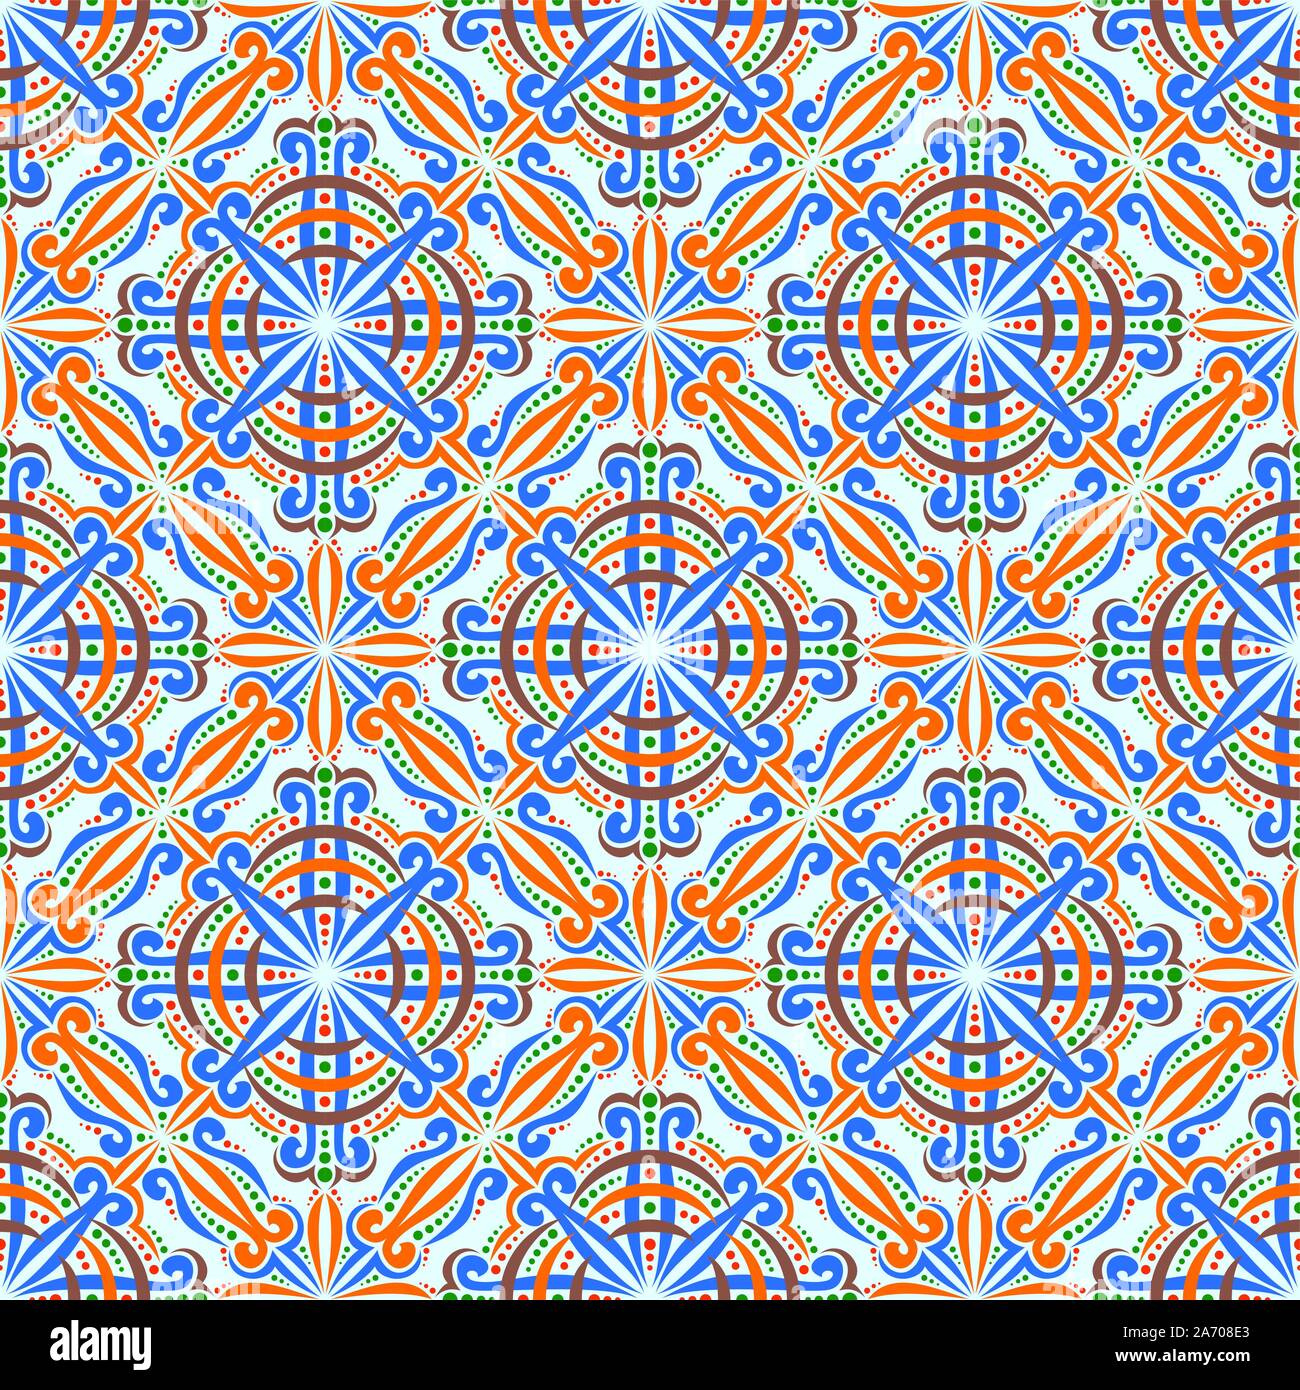 Vector decorative seamless pattern, indian repeating ornament with unusual blue and orange design elements, vintage ethnic theme for wallpaper, trendy Stock Vector